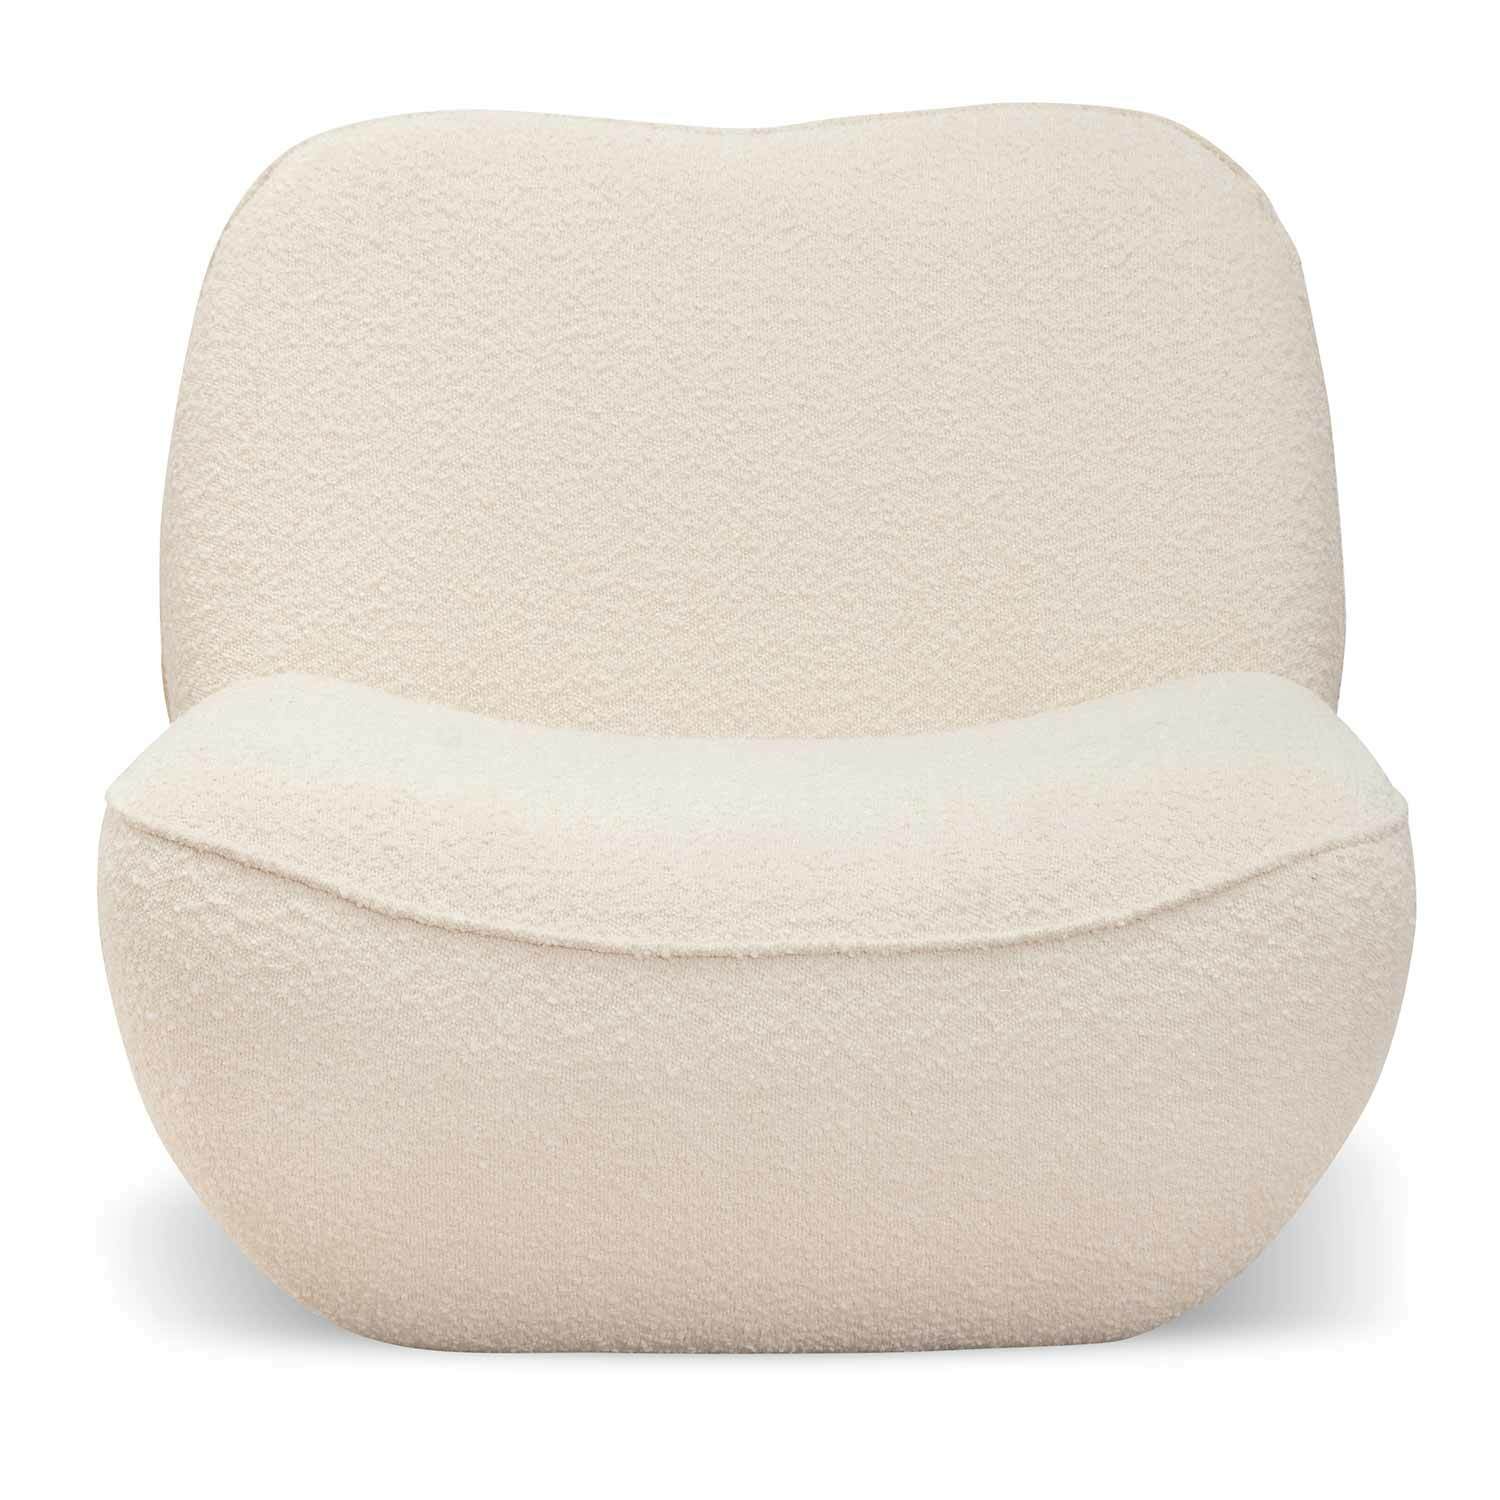 Dale Lounge Chair - Ivory White Boucle